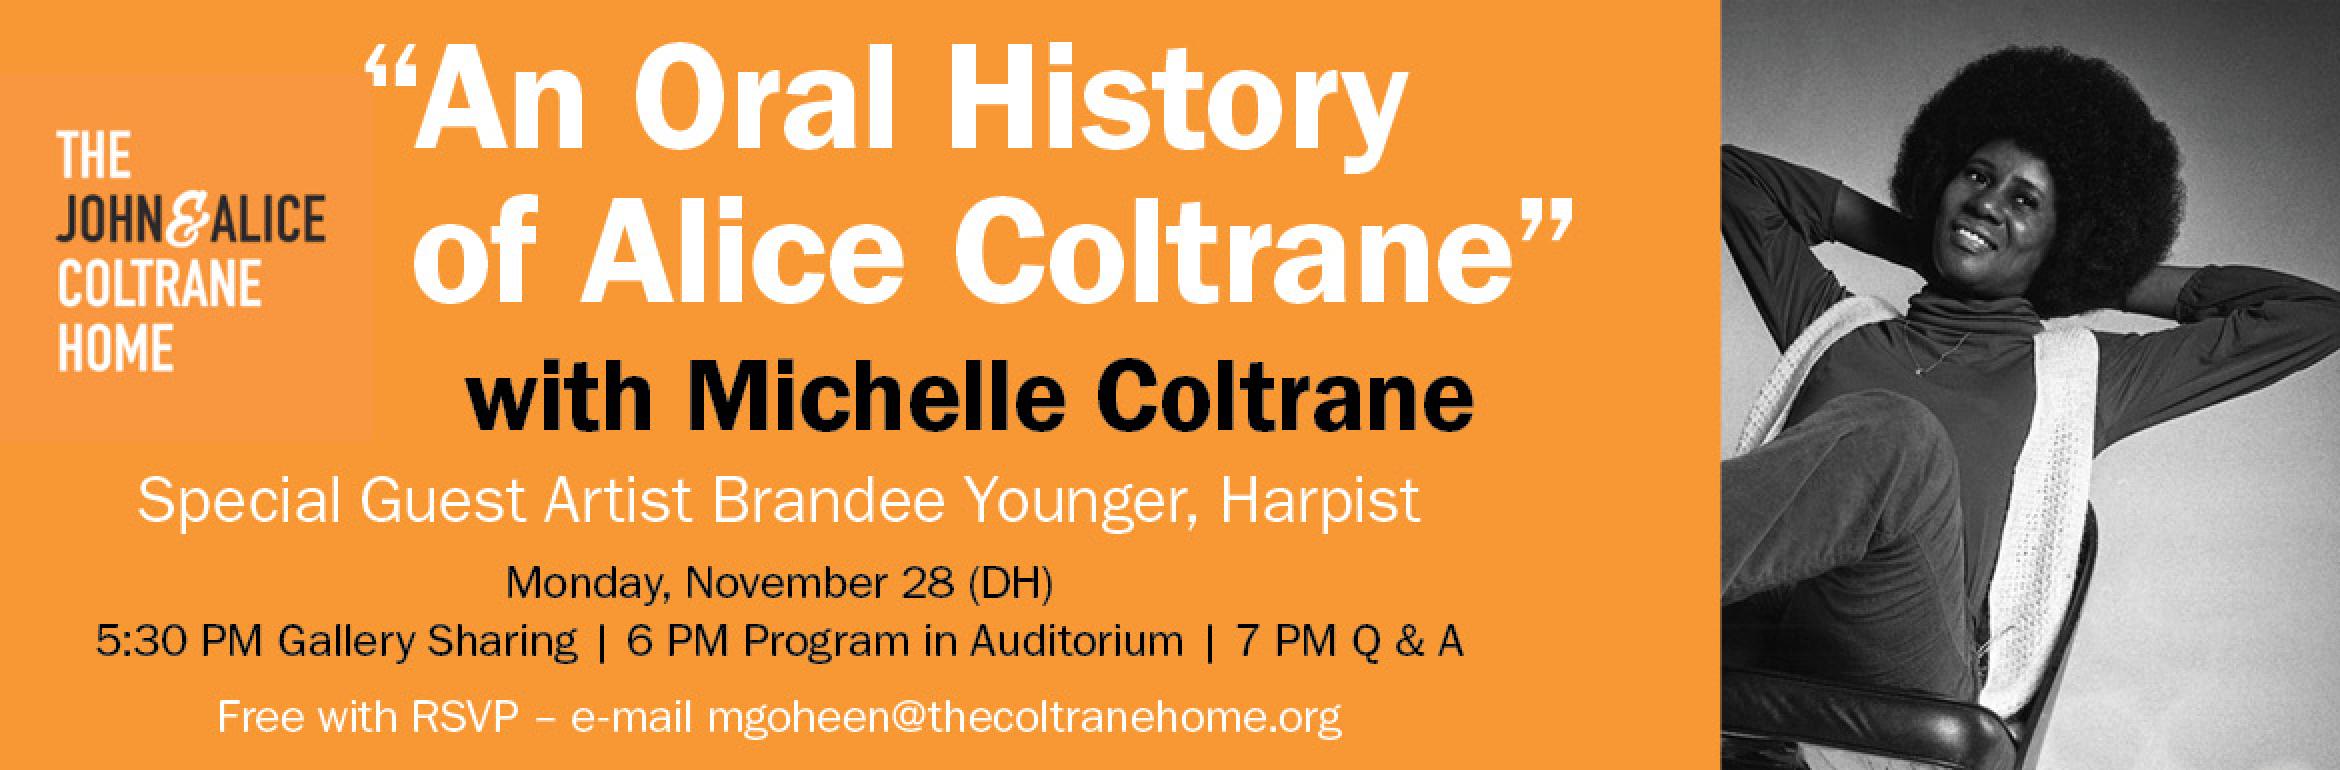 The John & Alice Coltrane Home. “An Oral History of Alice Coltrane” with Michelle Coltrane. Special Guest Artist Brandee Younger, Harpist. Monday, November 28 (DH). 5:30 PM Gallery Sharing, 6 PM Program in Auditorium, 7 PM Q & A. Free with RSVP – e-mail mgoheen@thecoltranehome.org.